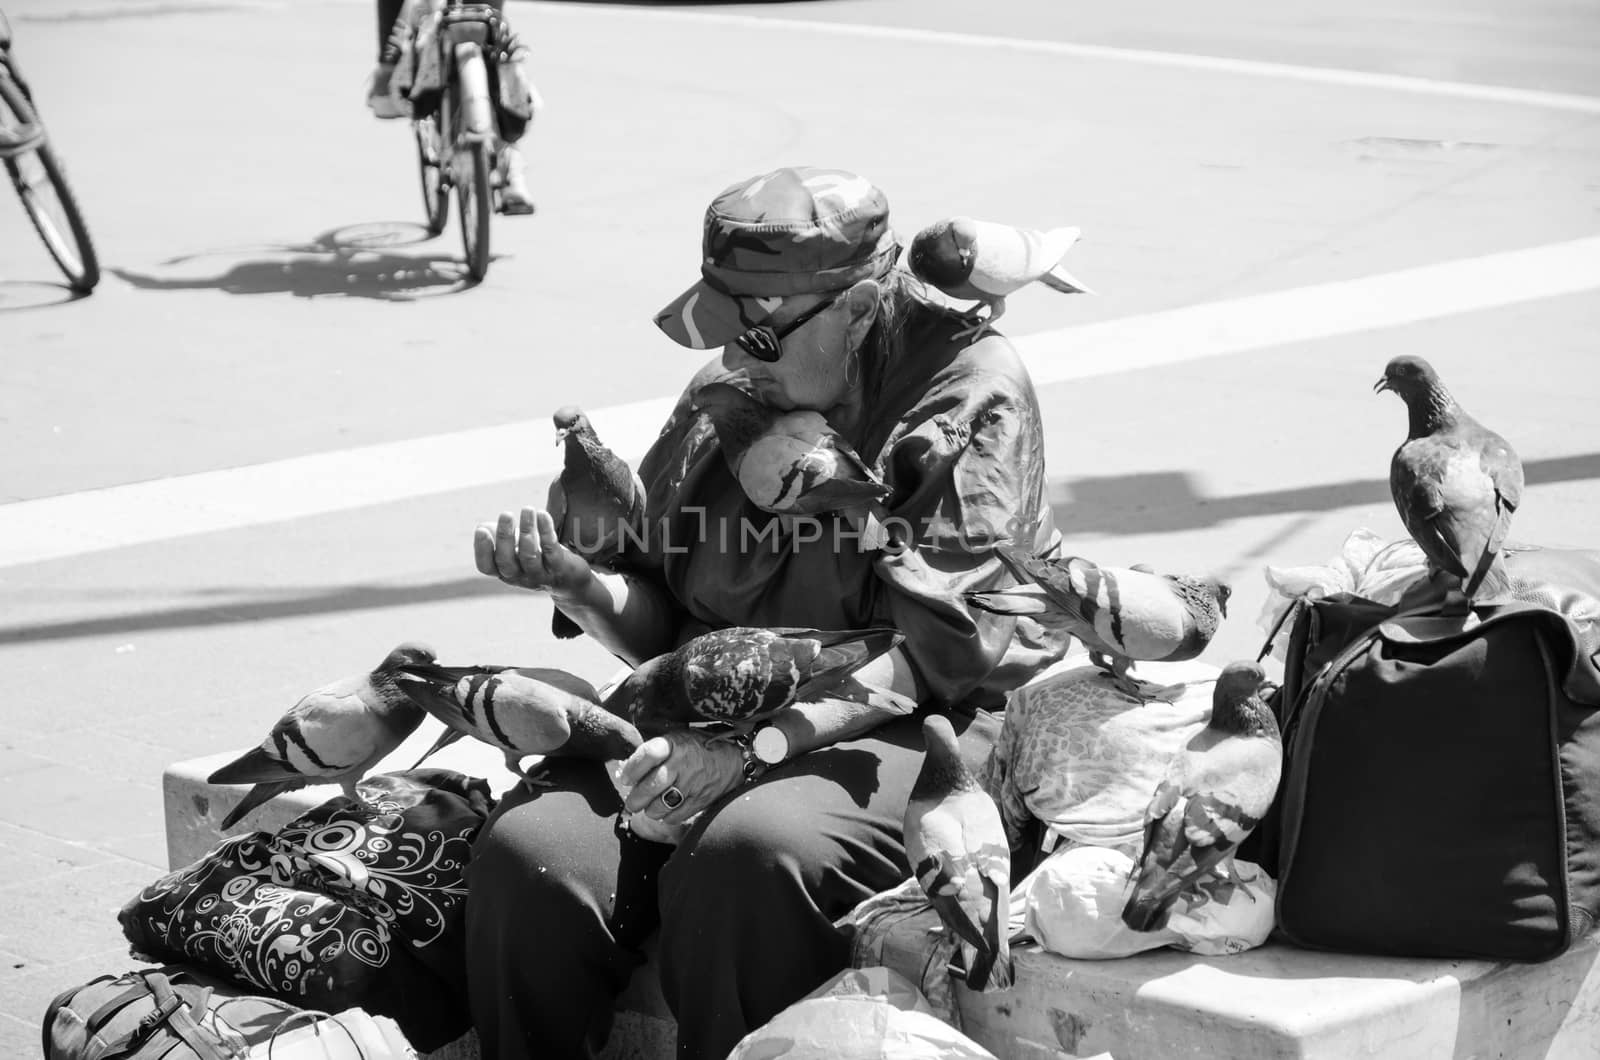 Rome, Italy. April 2019. Pigeons cover a homeless woman intent on feeding them. Black and white picture by cromam70